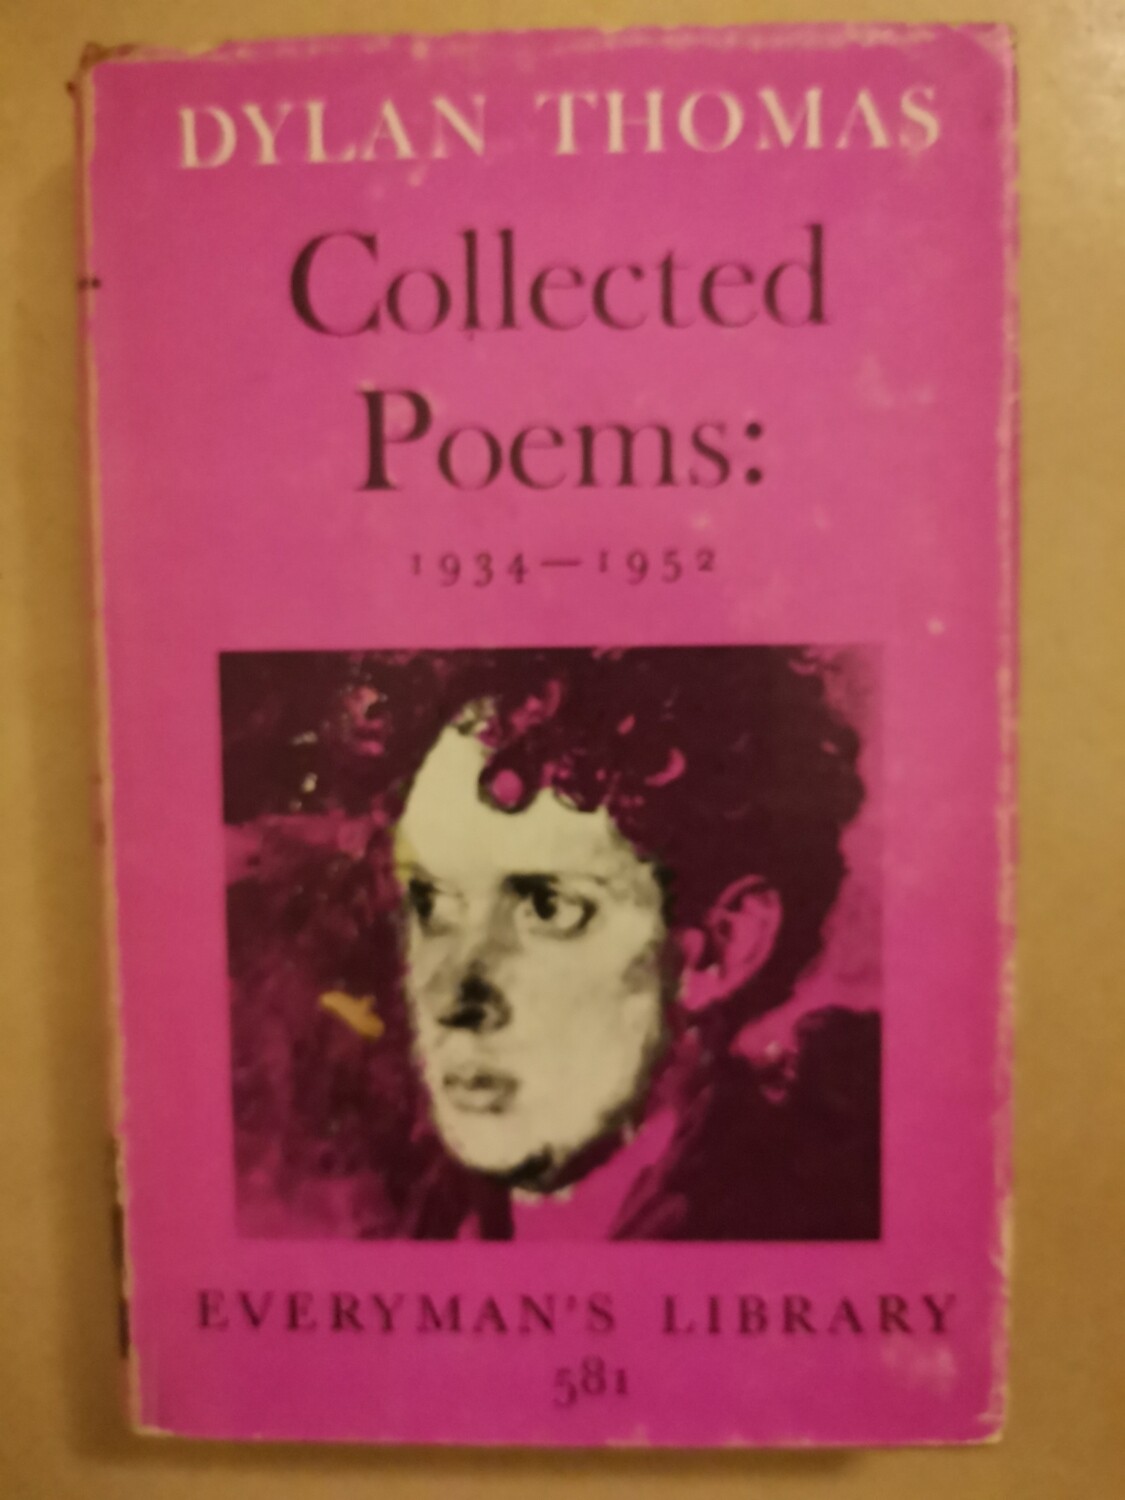 Dylan Thomas collected poems